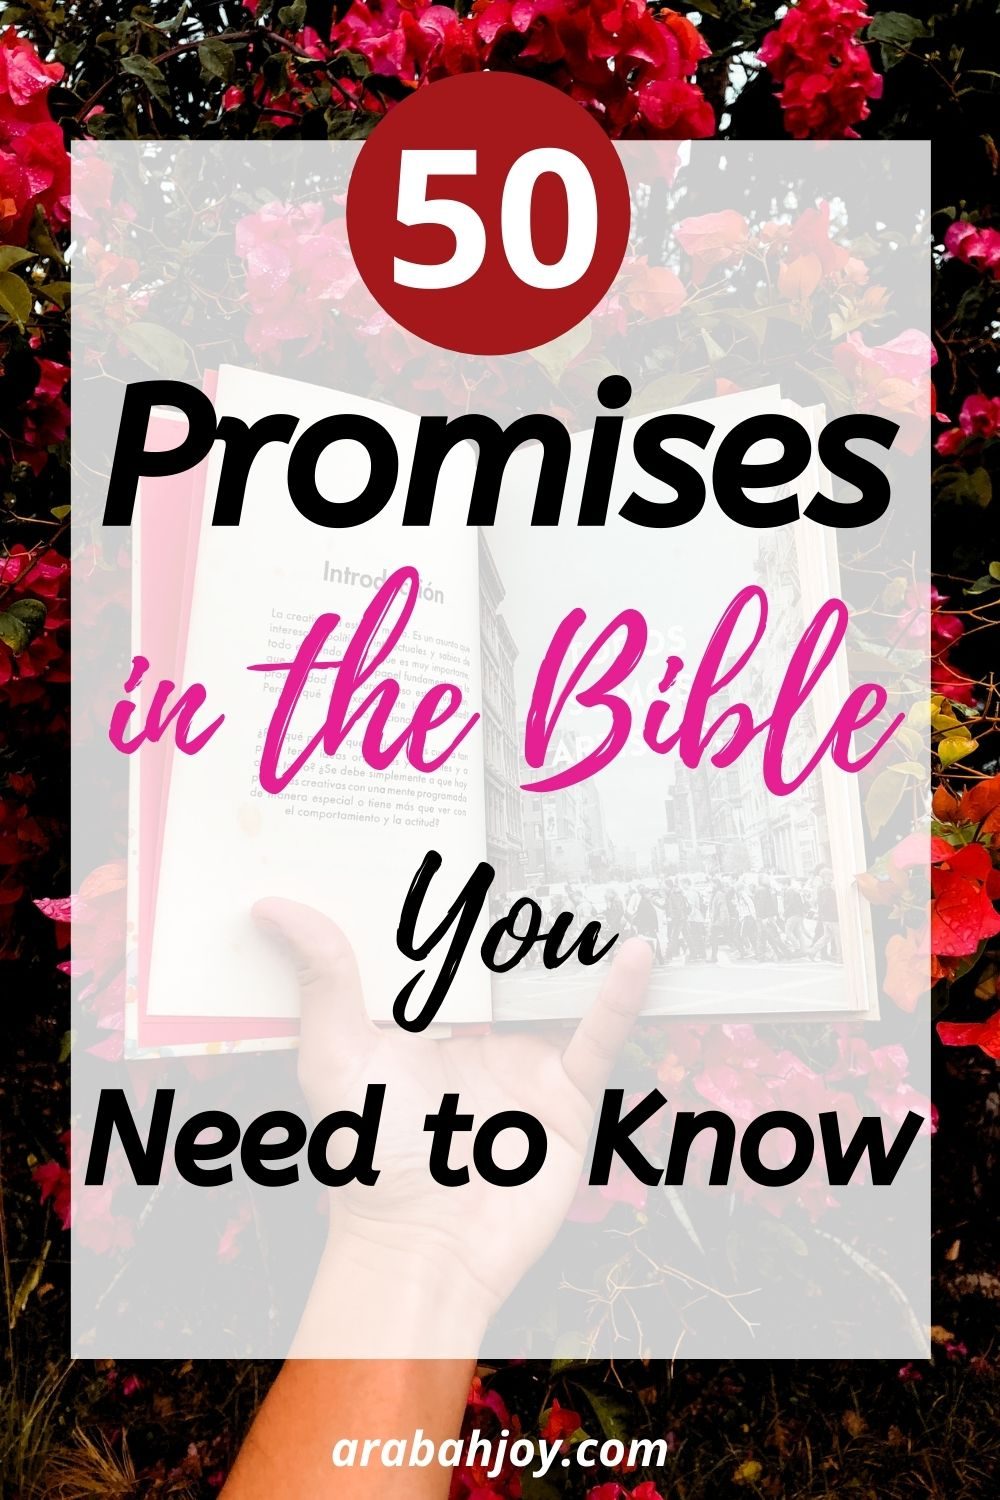 The promises of God can bring strength and comfort to our hearts. Here are 50 of God's promises you can stand on when life gets uncertain.